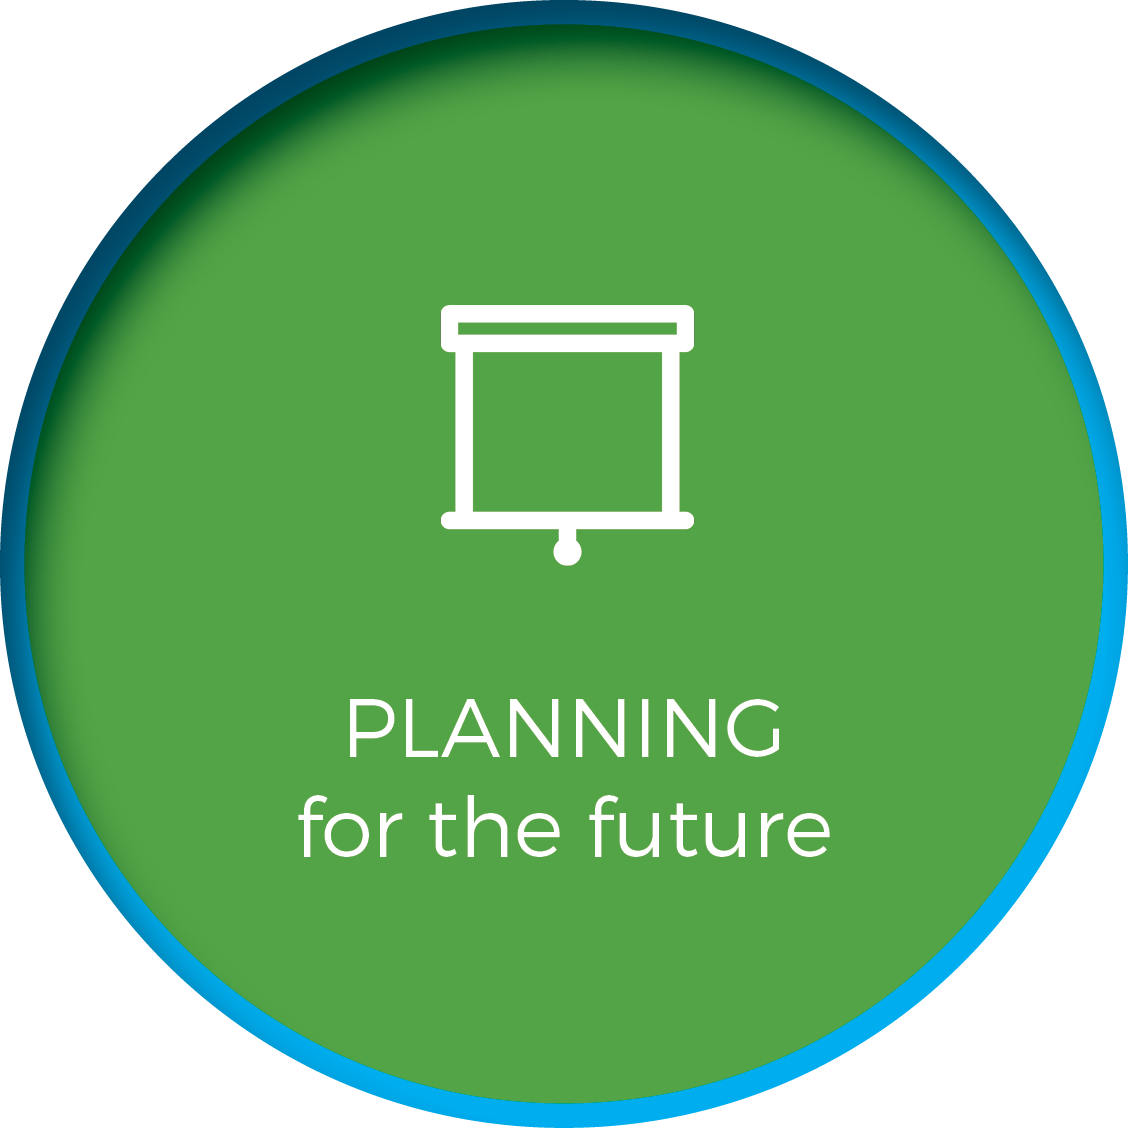 Planning for the future